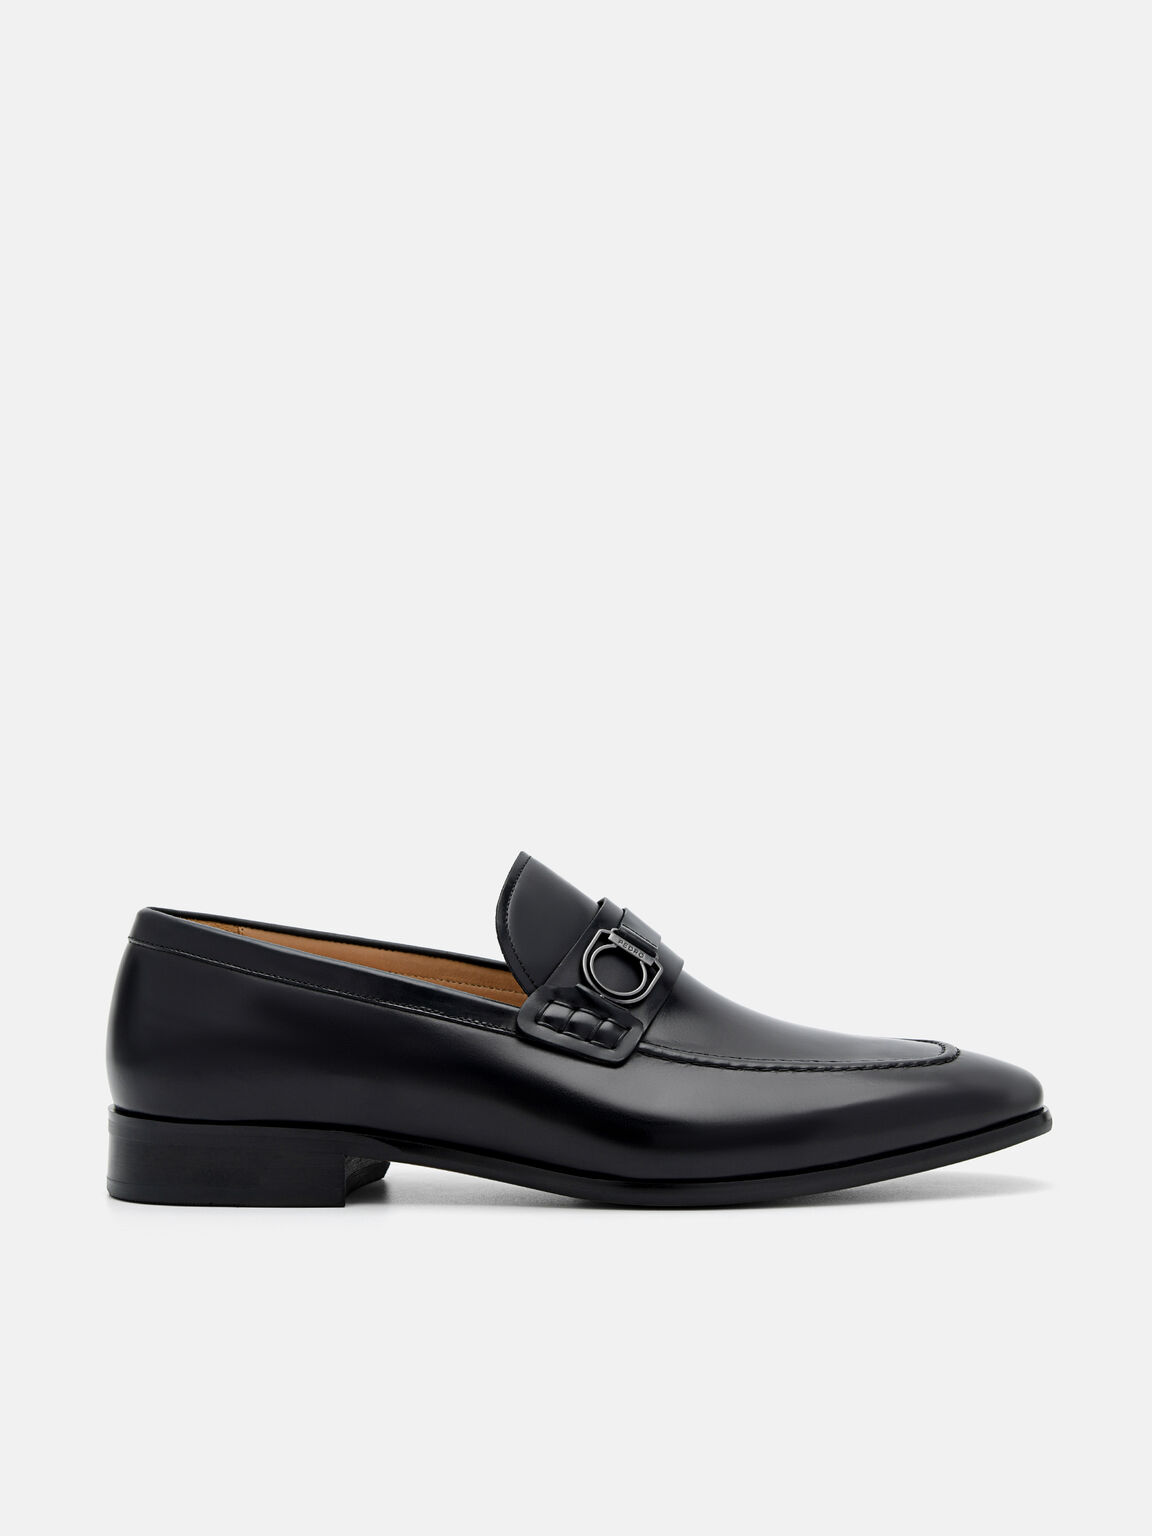 Leather Buckle Loafers, Black